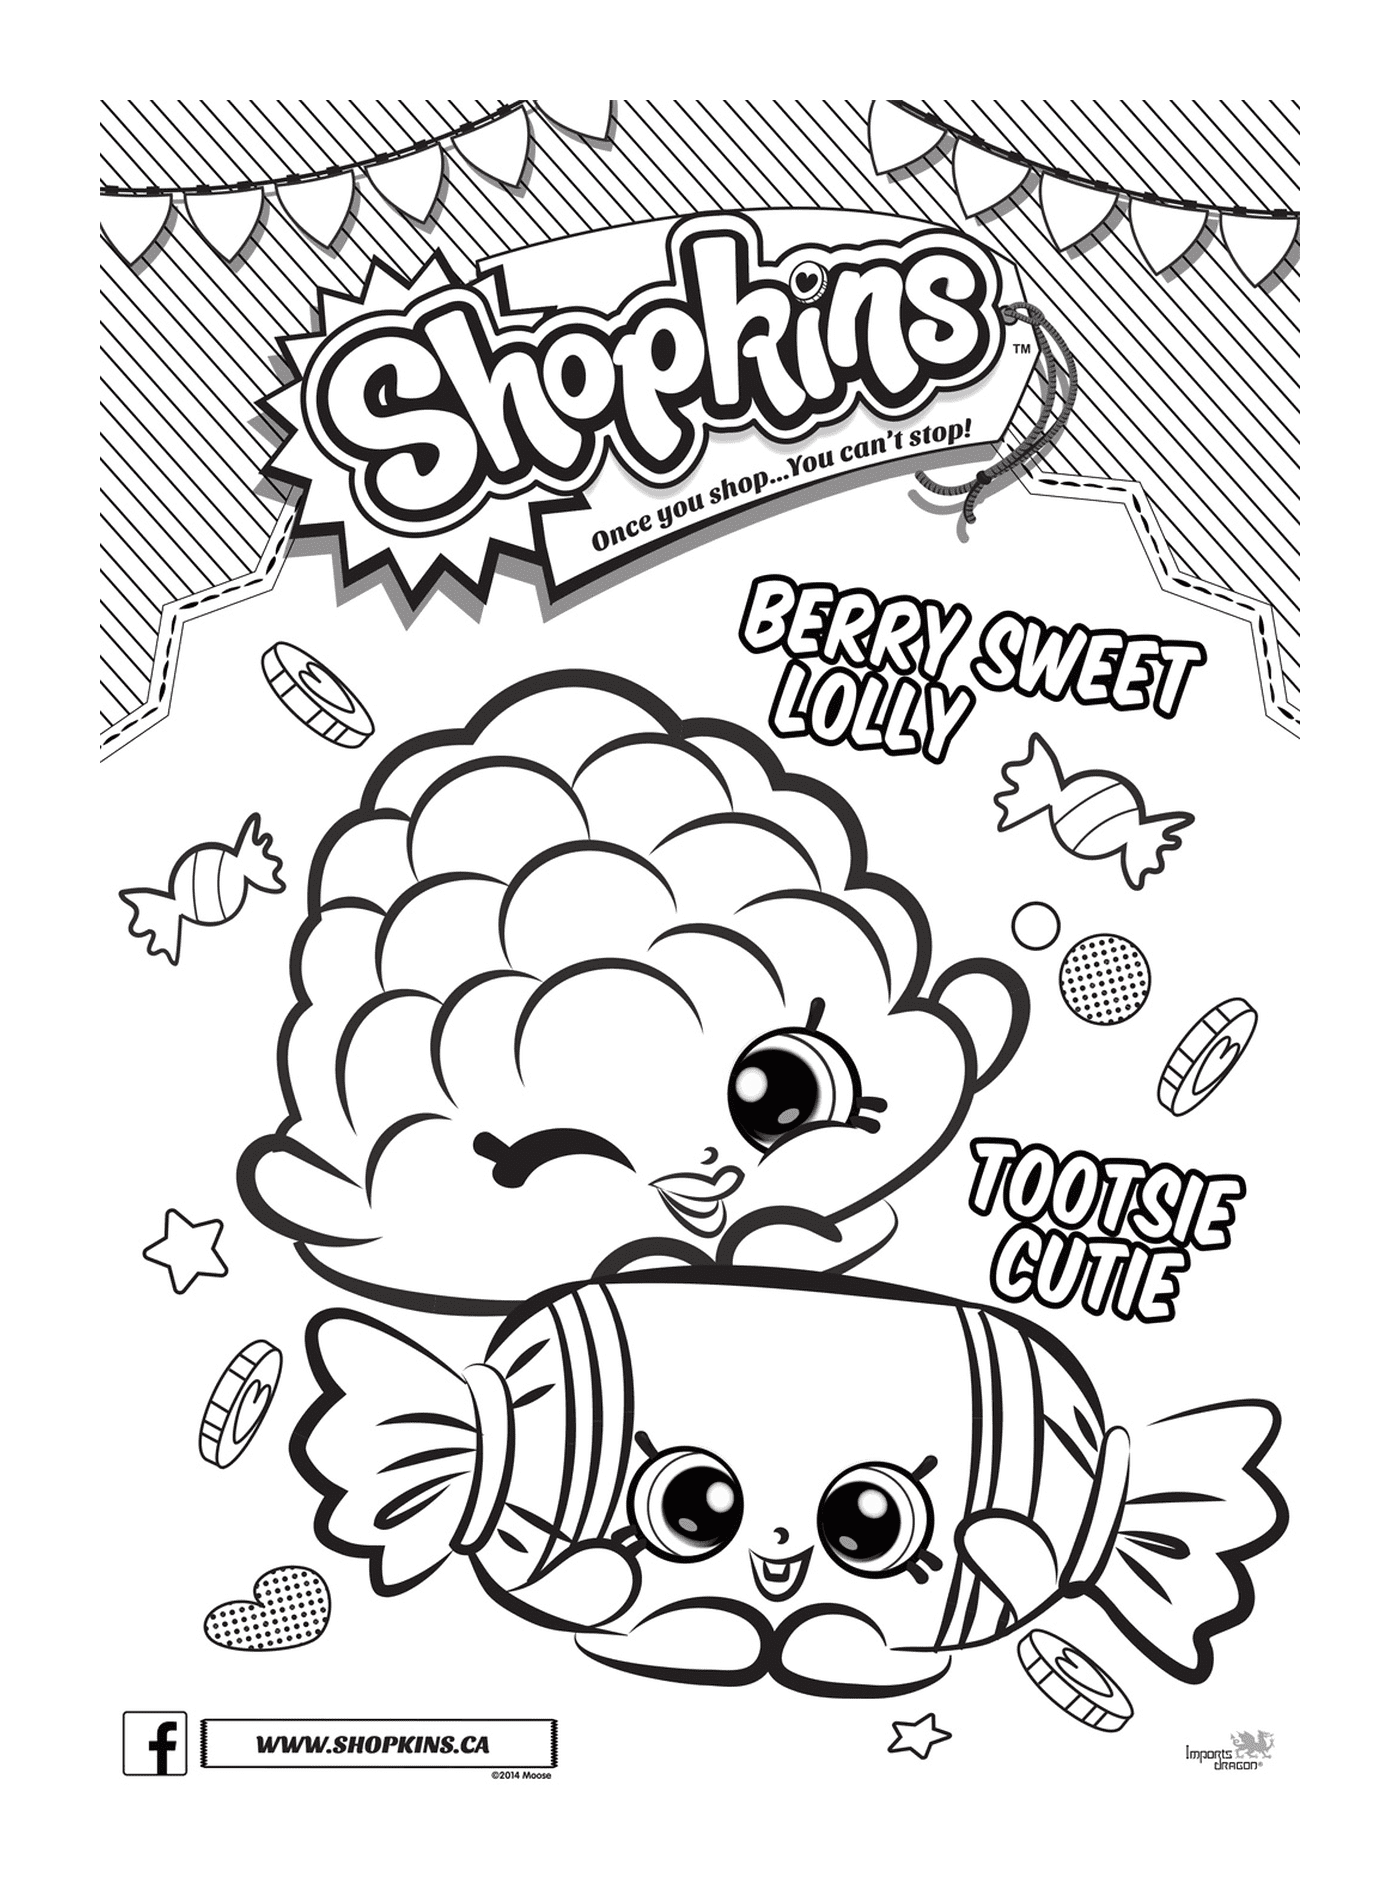 coloriage shopkins berry sweet lolly tootsie cutie